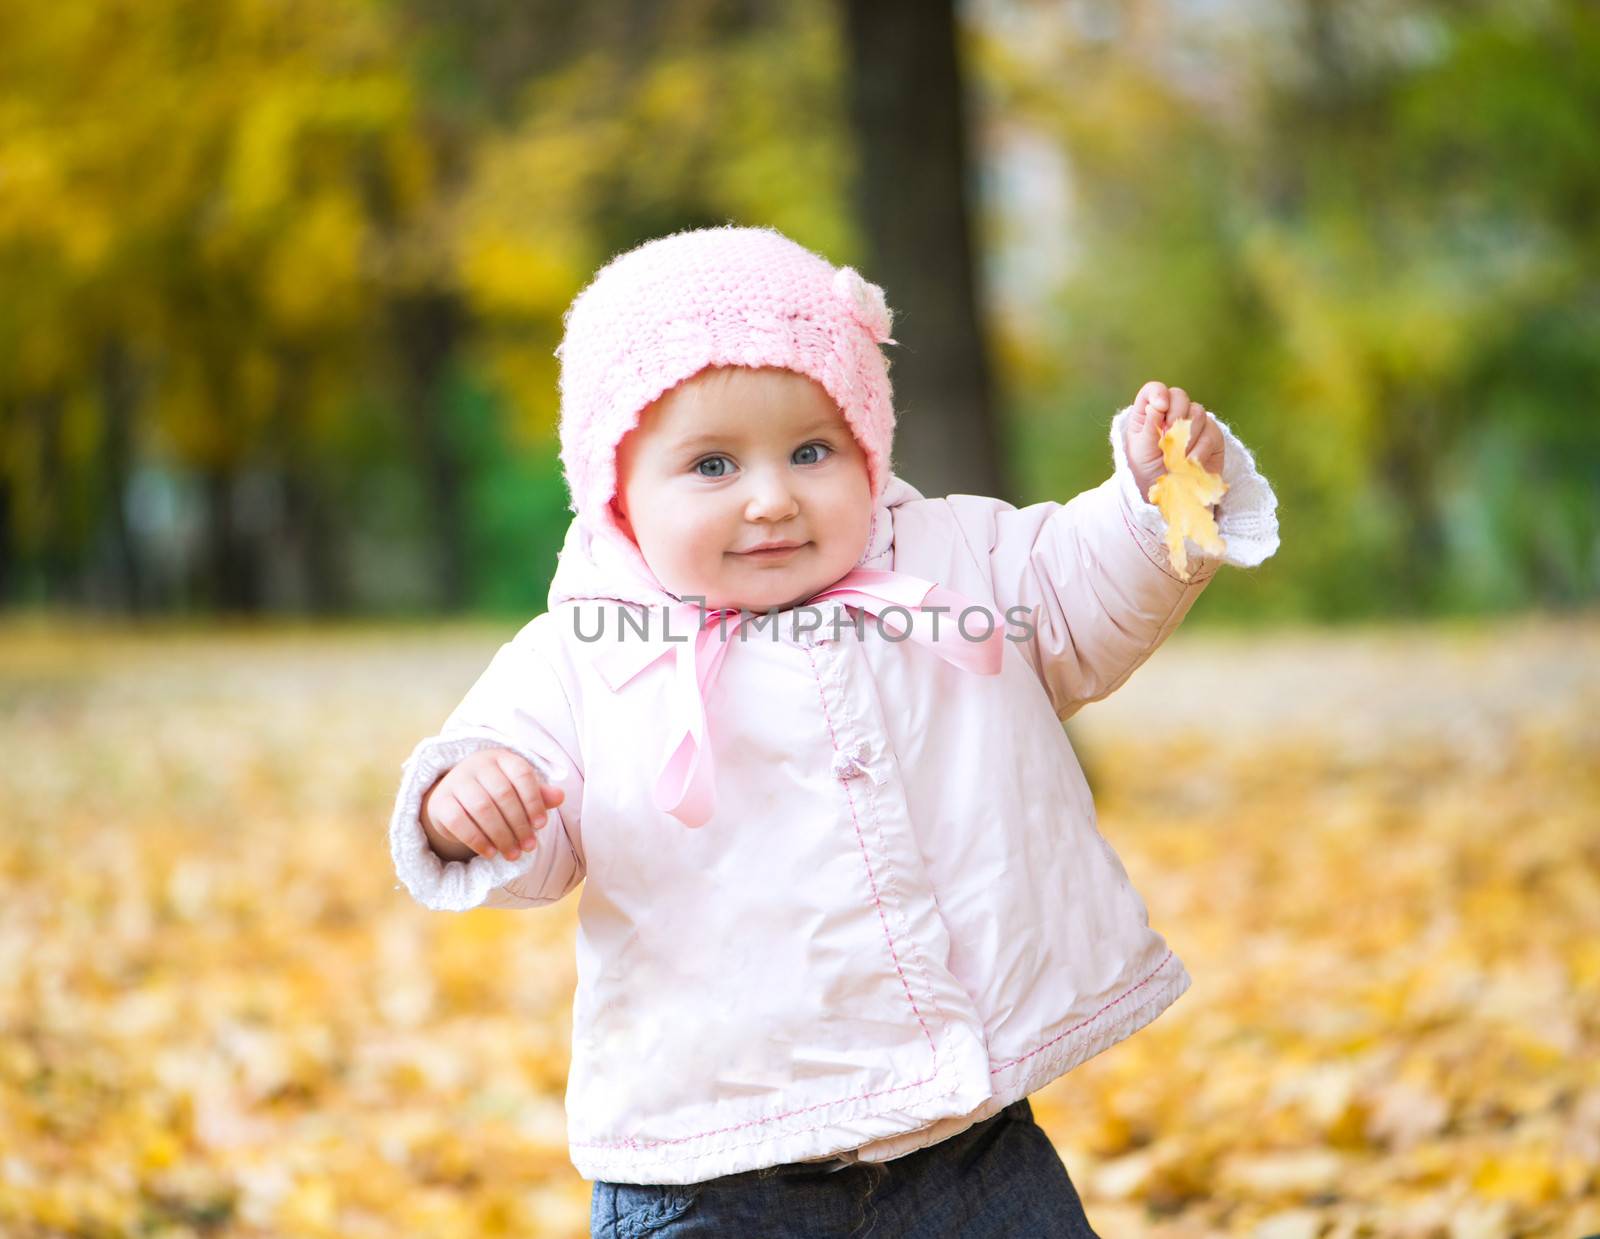 cutelittle baby in the park with autumn leaves